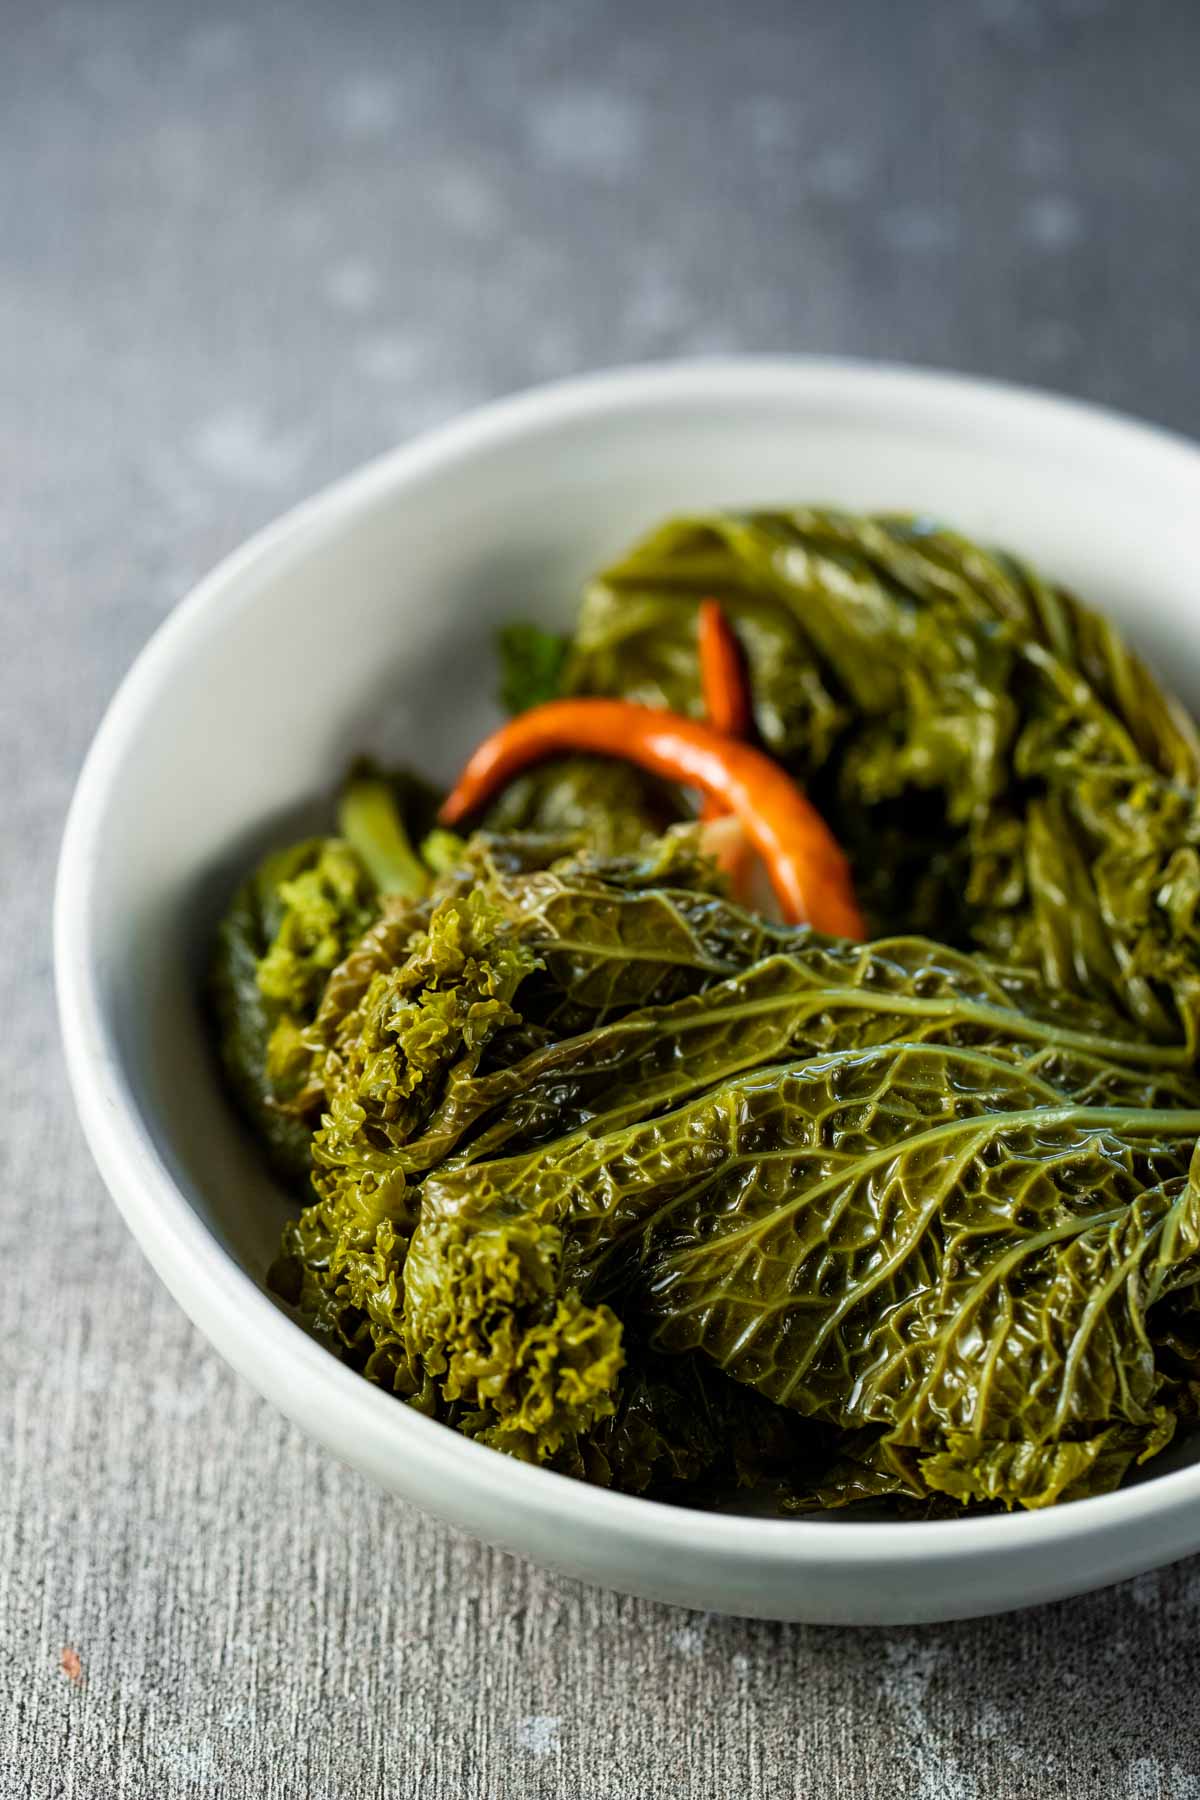 https://www.wenthere8this.com/wp-content/uploads/2022/08/pickled-mustard-greens-5.jpg